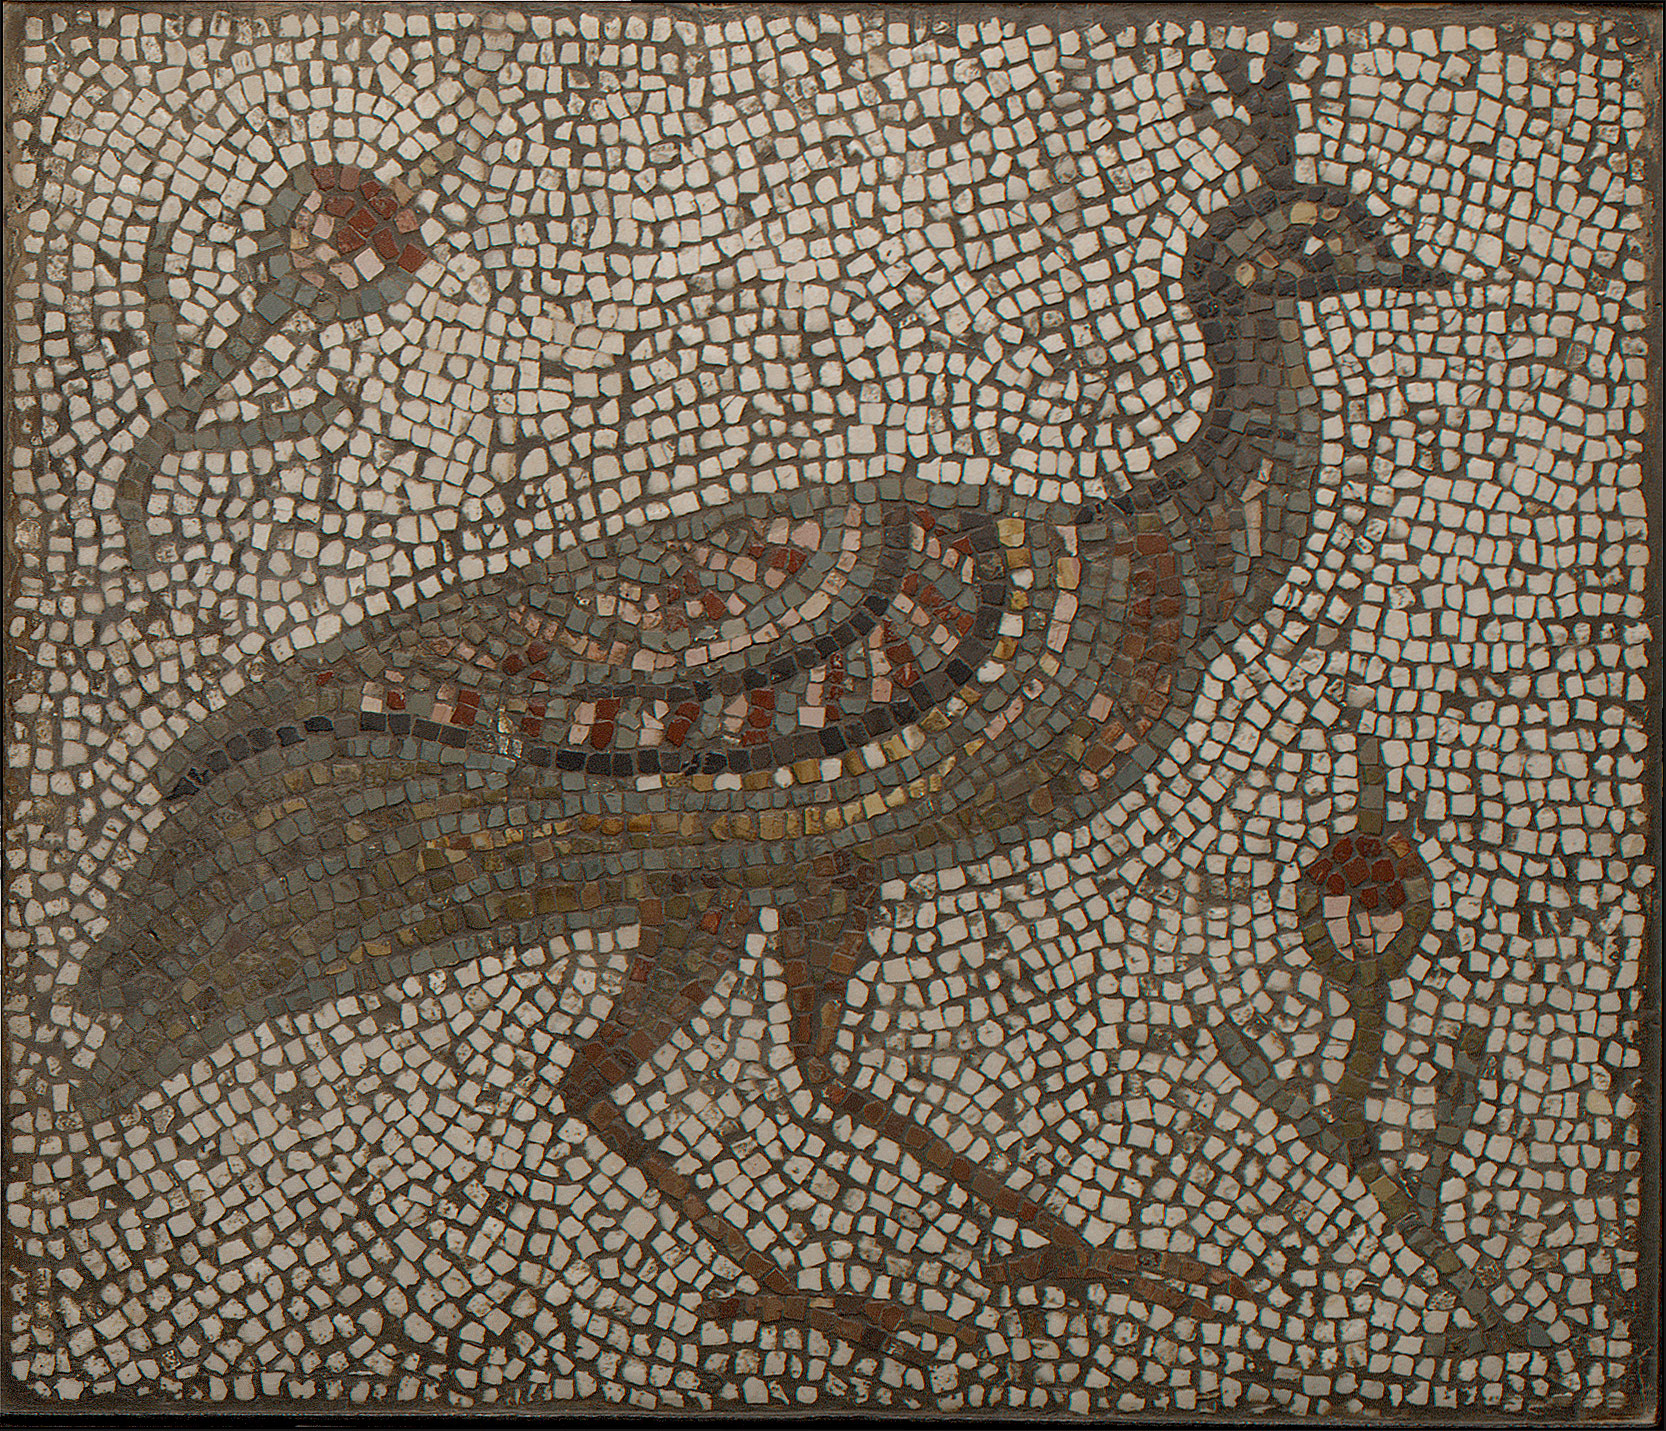 Mosaic with a Peacock and Flowers